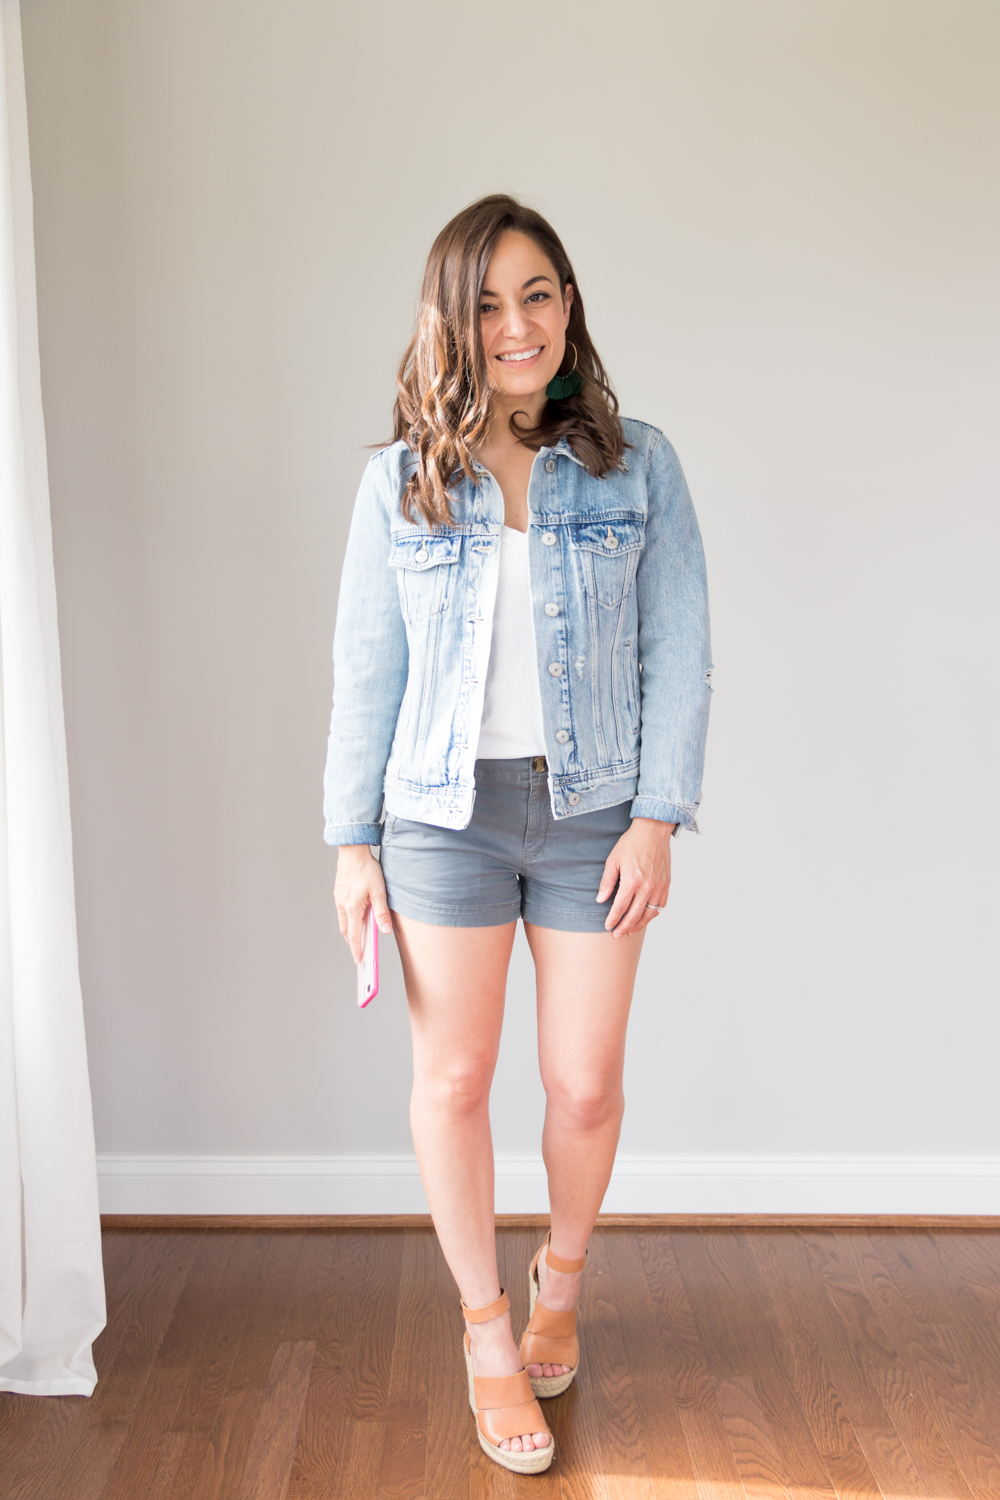 jean jacket with shorts outfit